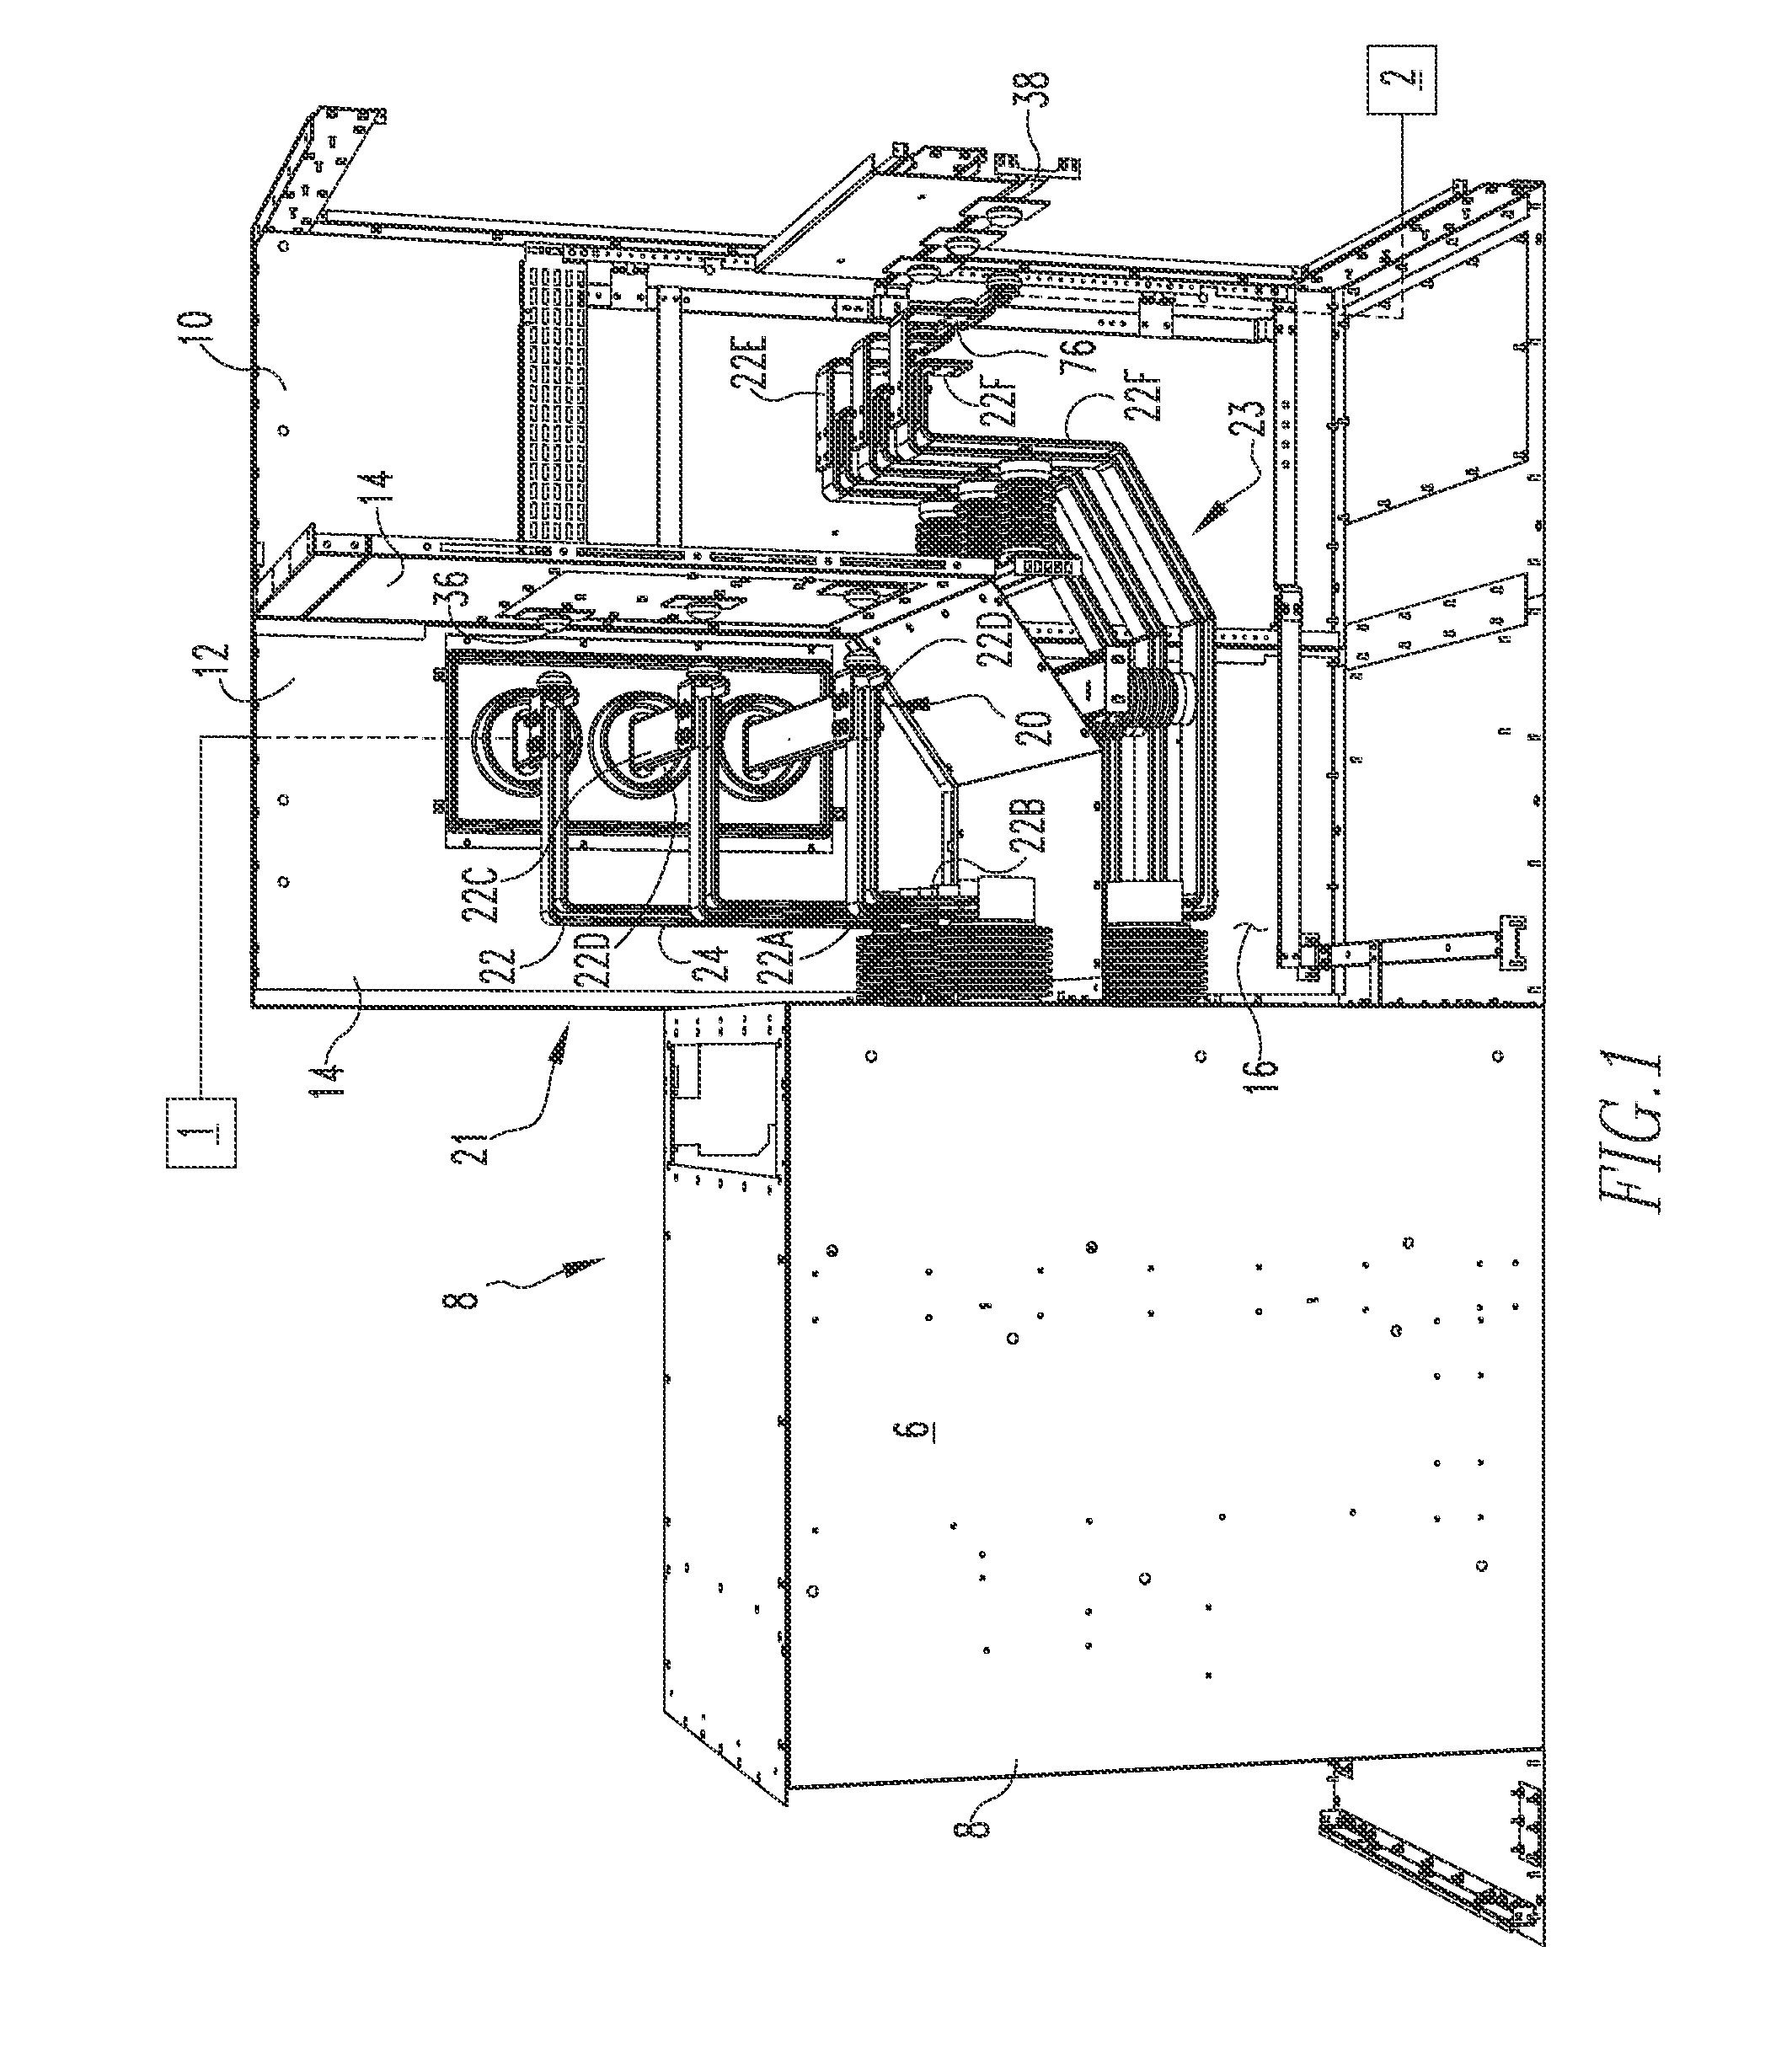 Arc management system for an electrical enclosure assembly